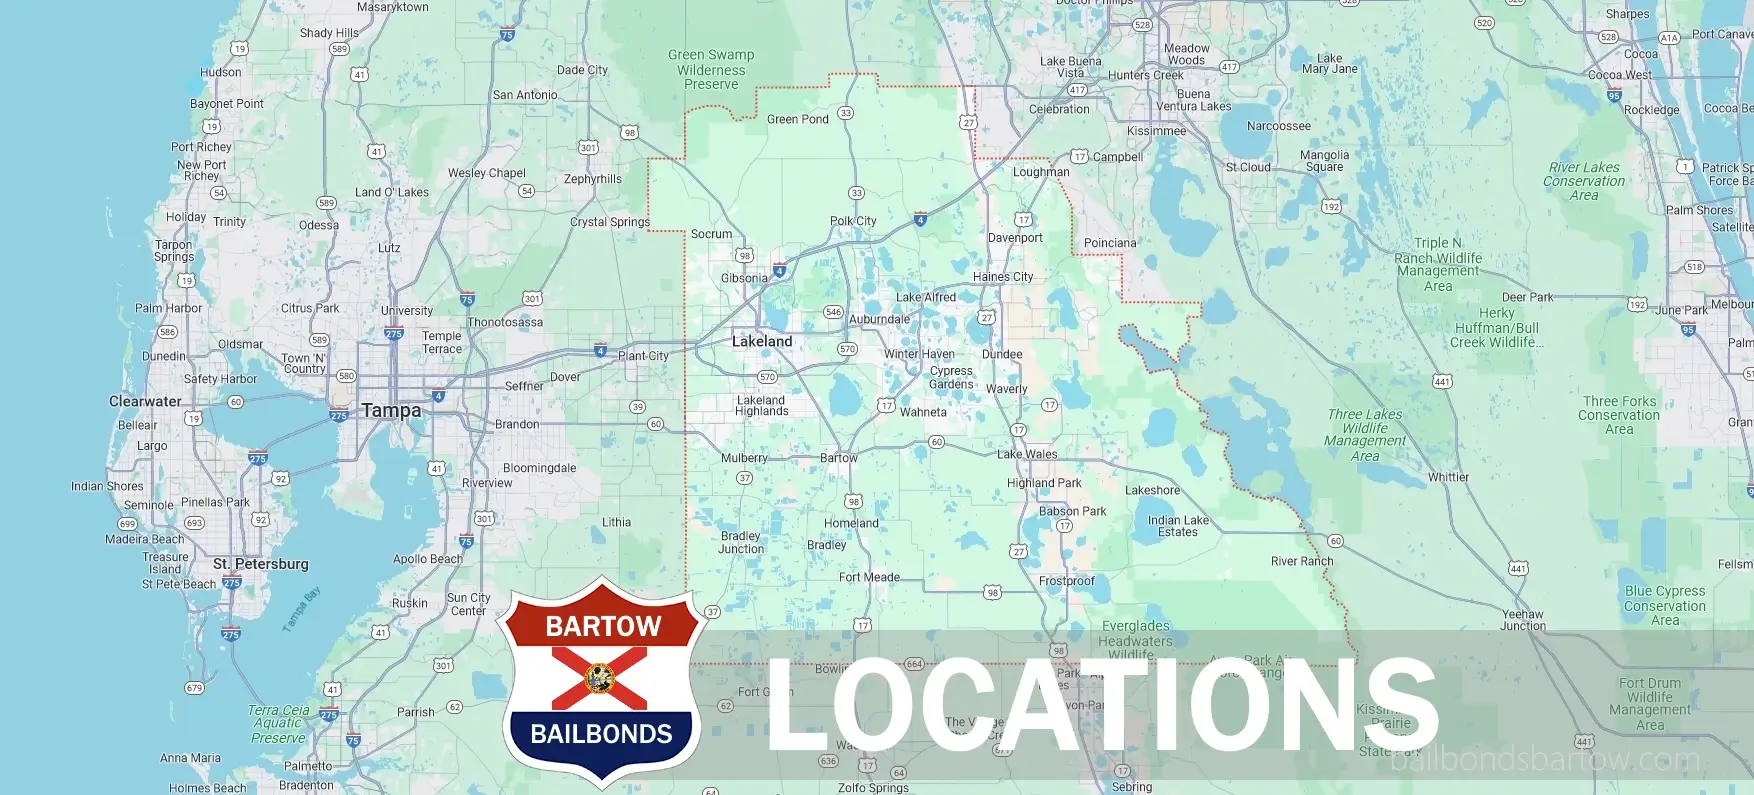 Bail Bond Locations in Florida open 24 hours